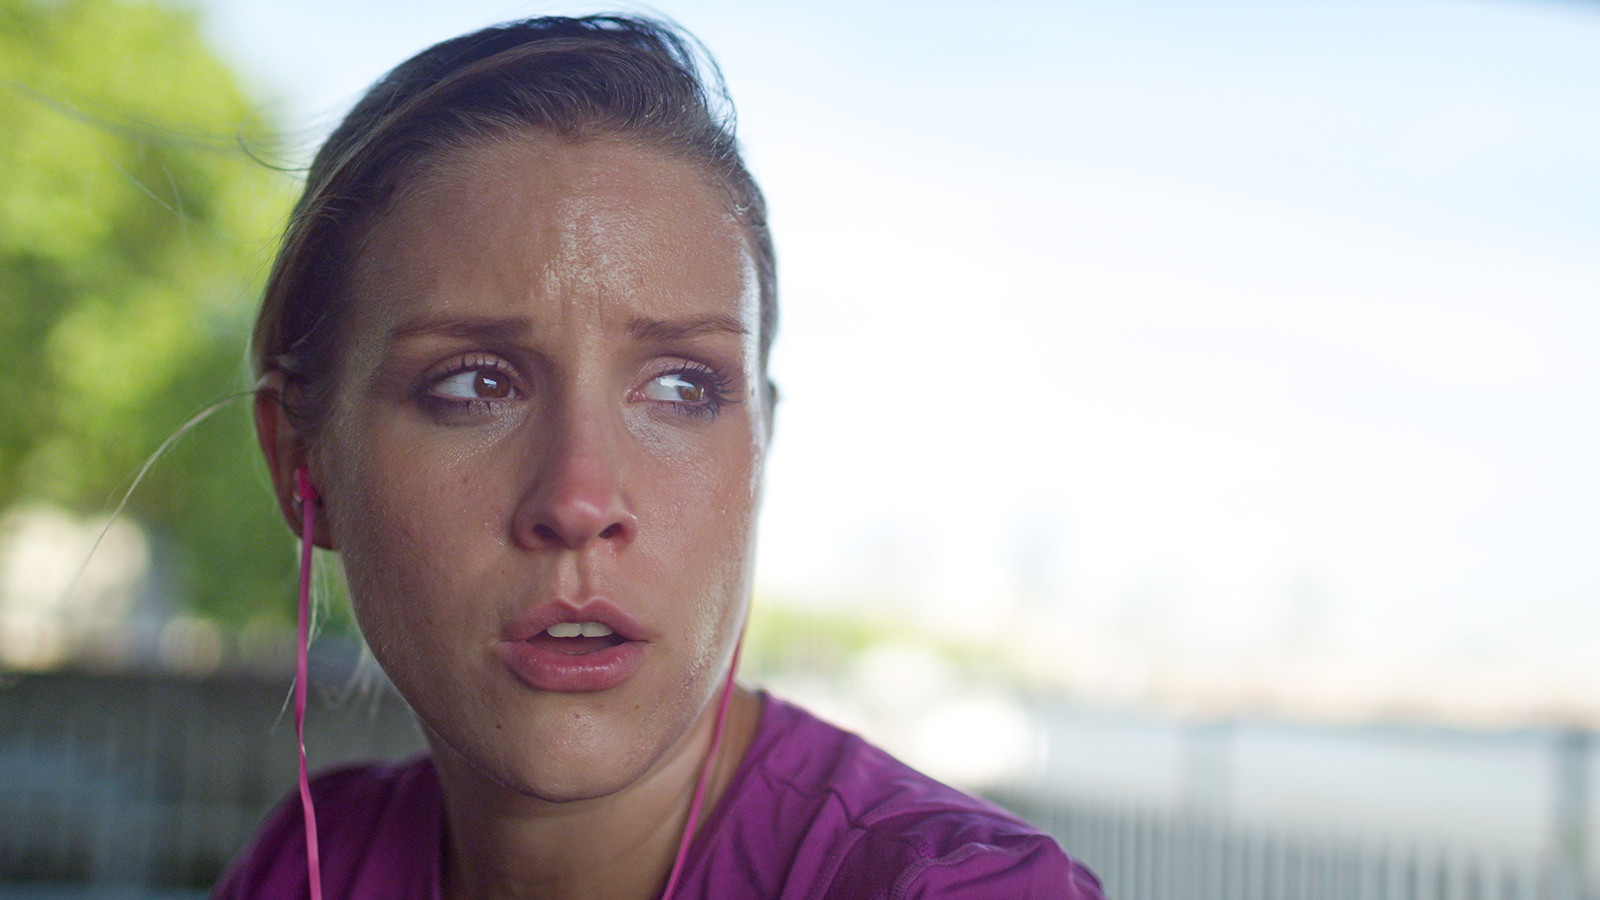 A woman's face, sweating, taking a break after a jog.